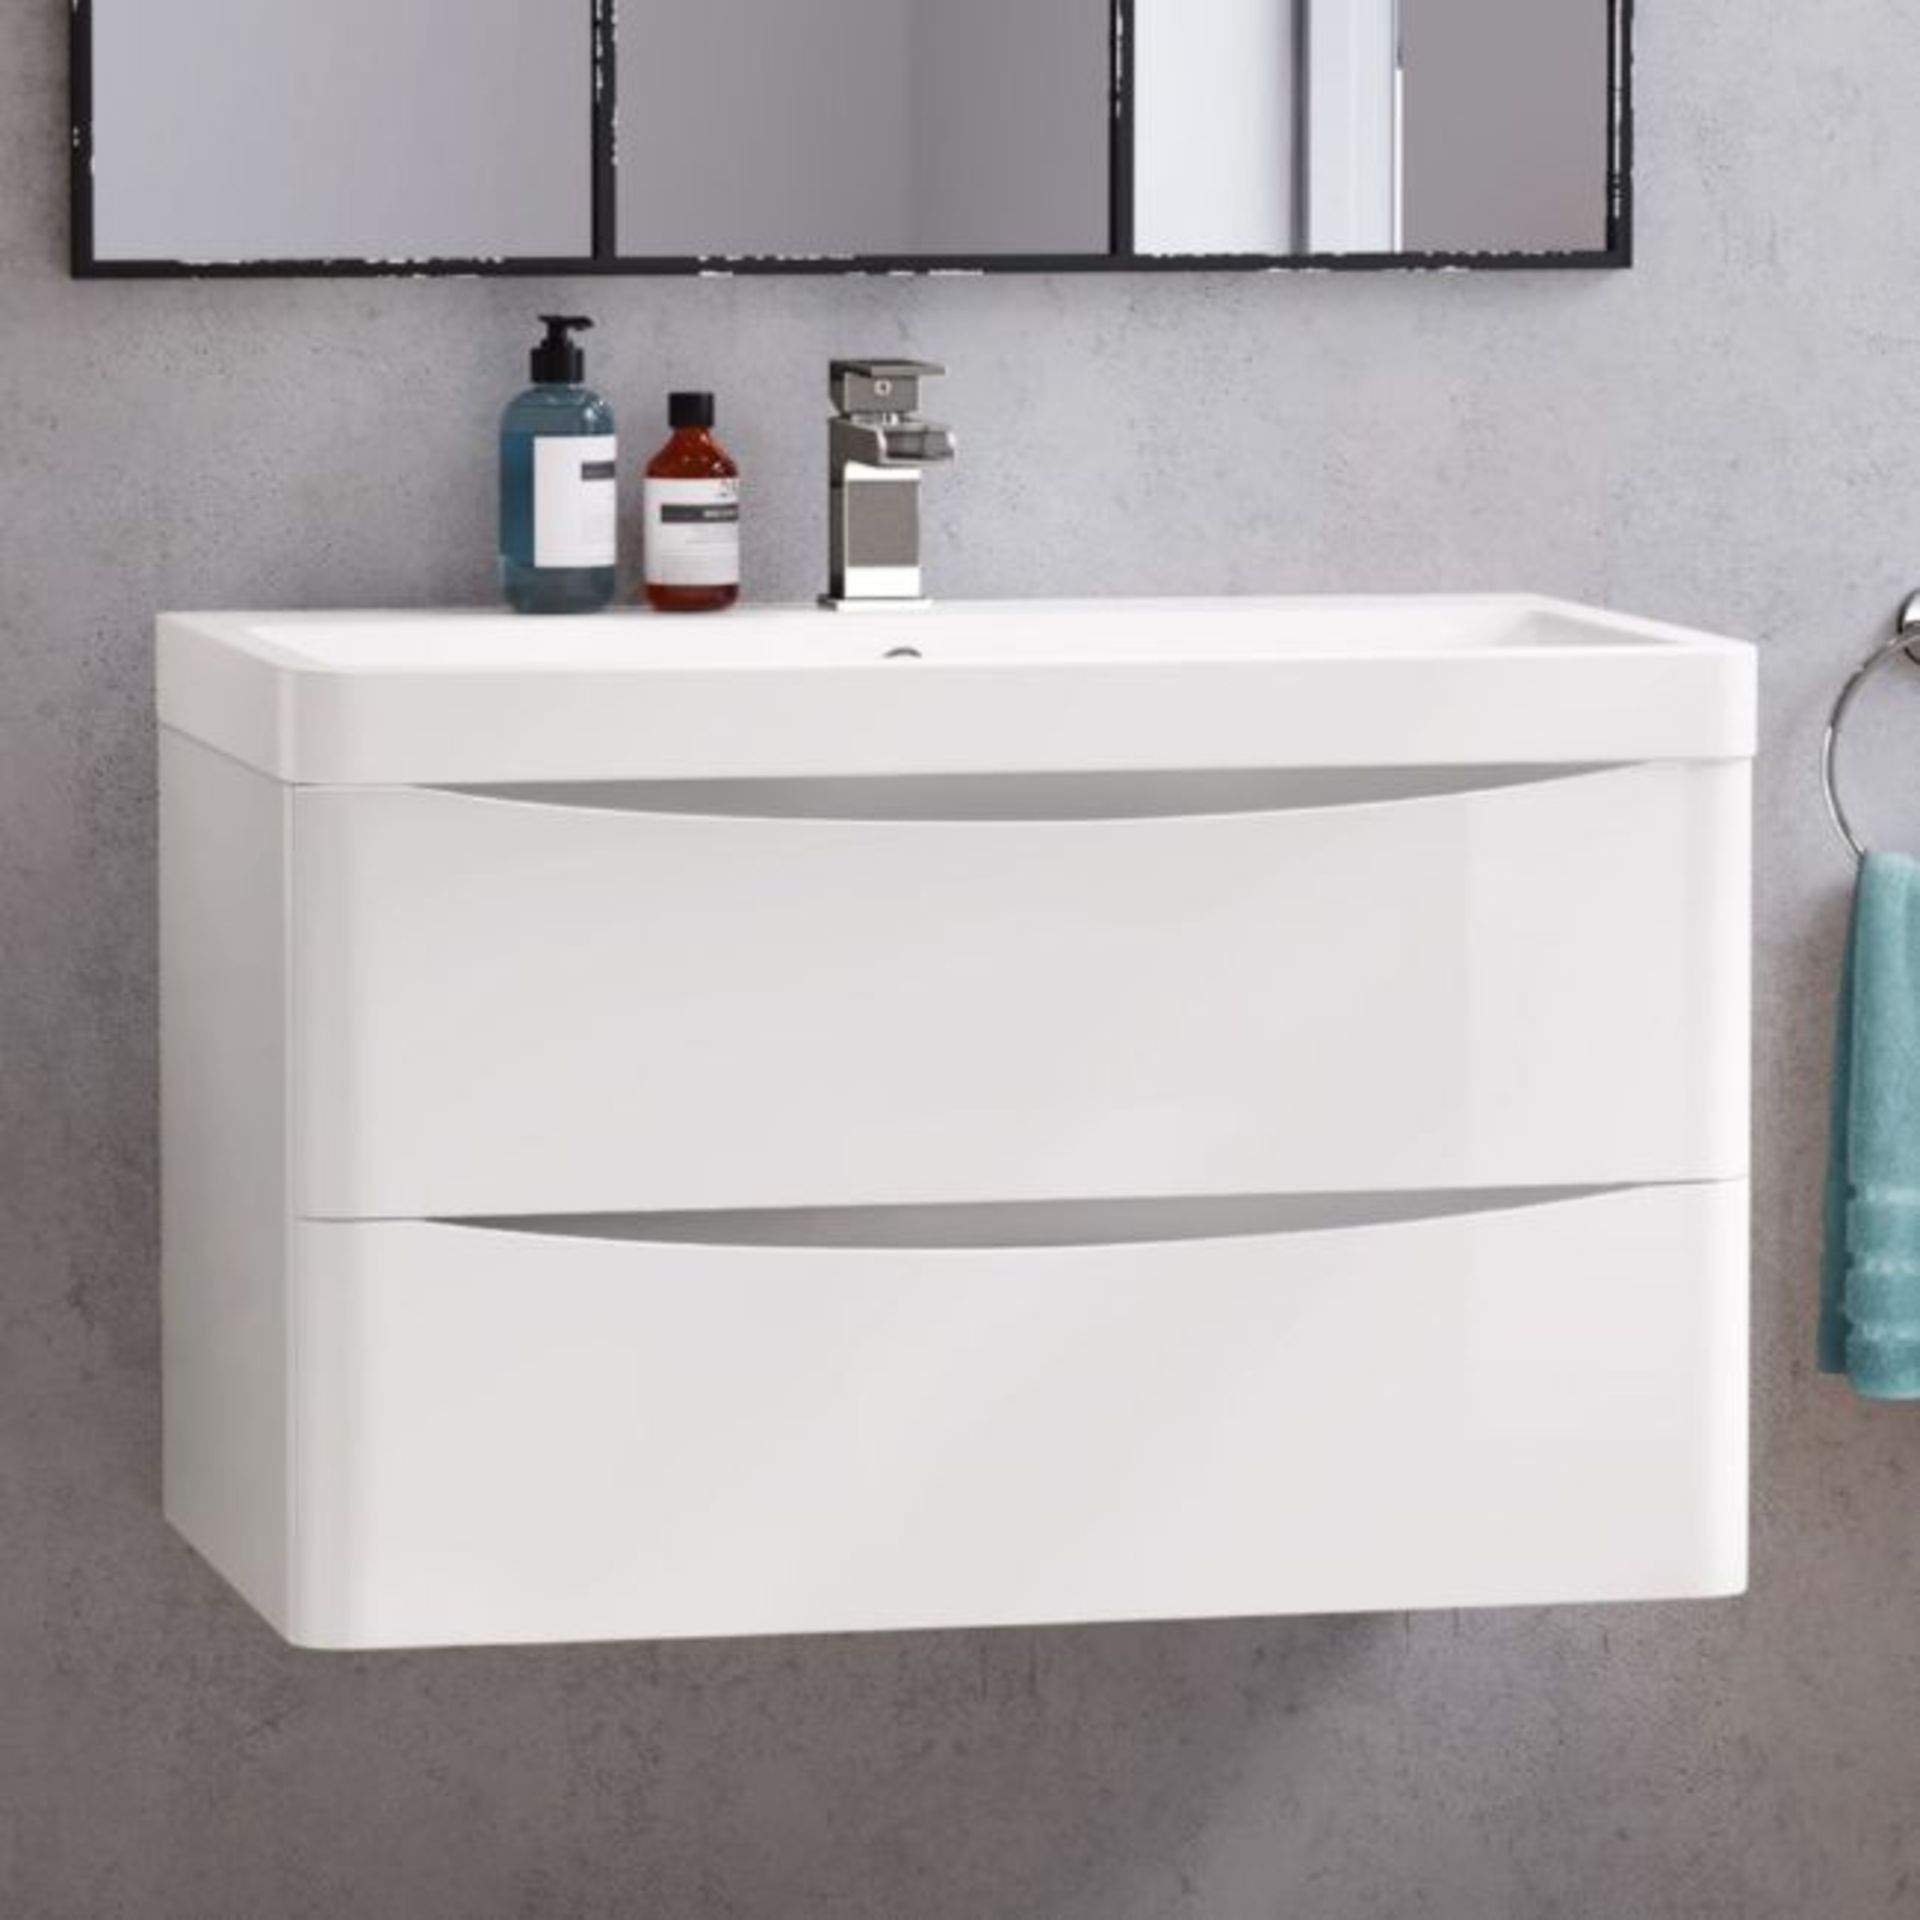 BRAND NEW BOXED 1000mm Austin II Gloss White Built In Basin Drawer Unit - Wall Hung.RRP £499.99.